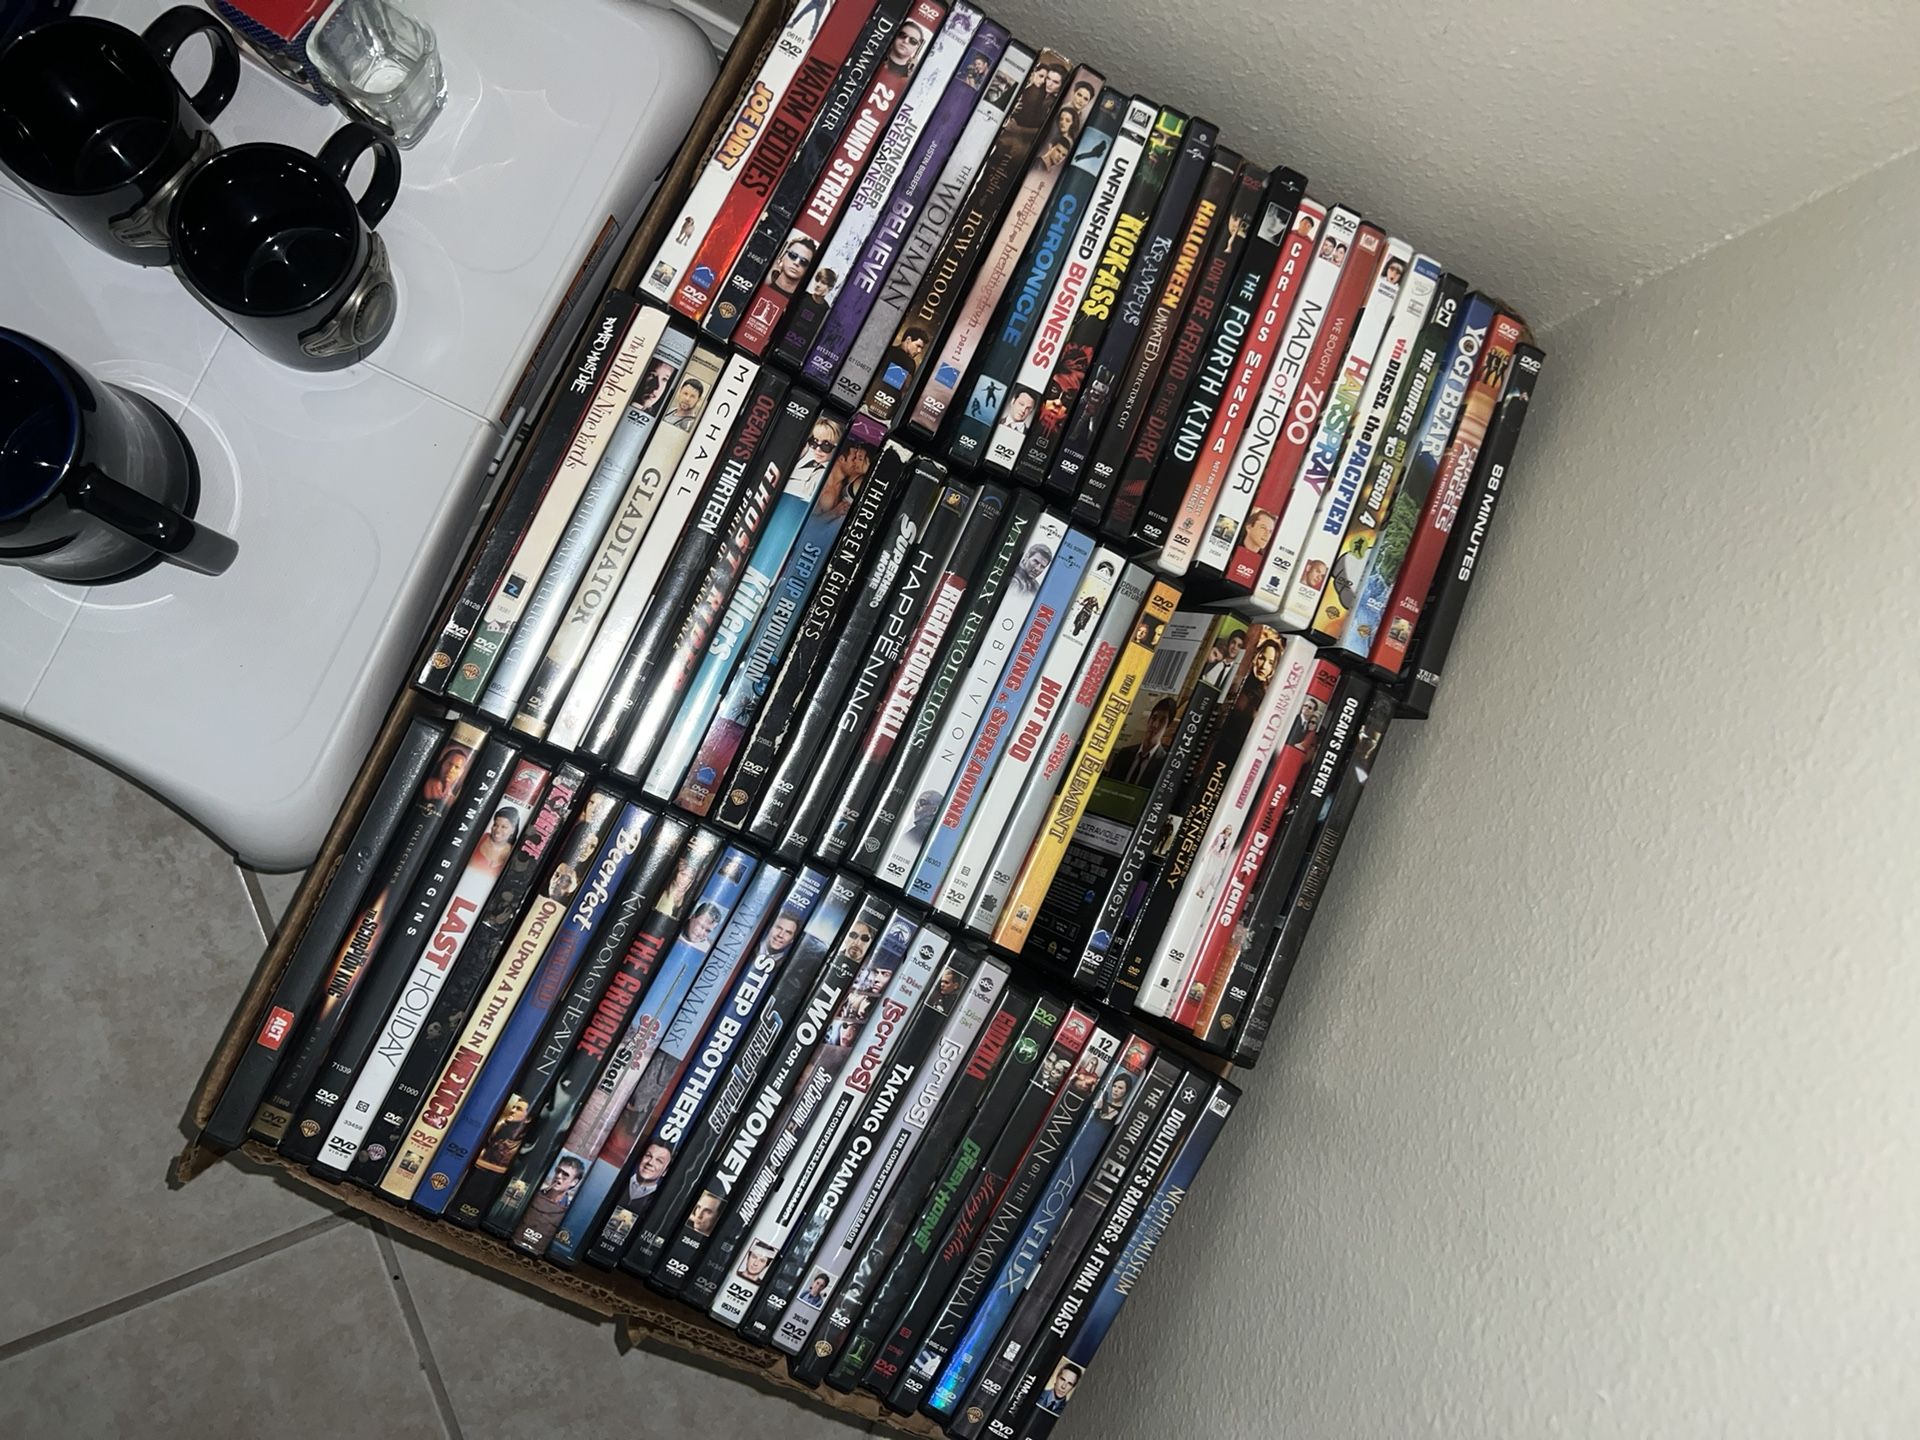 200+ DVDs/Movies